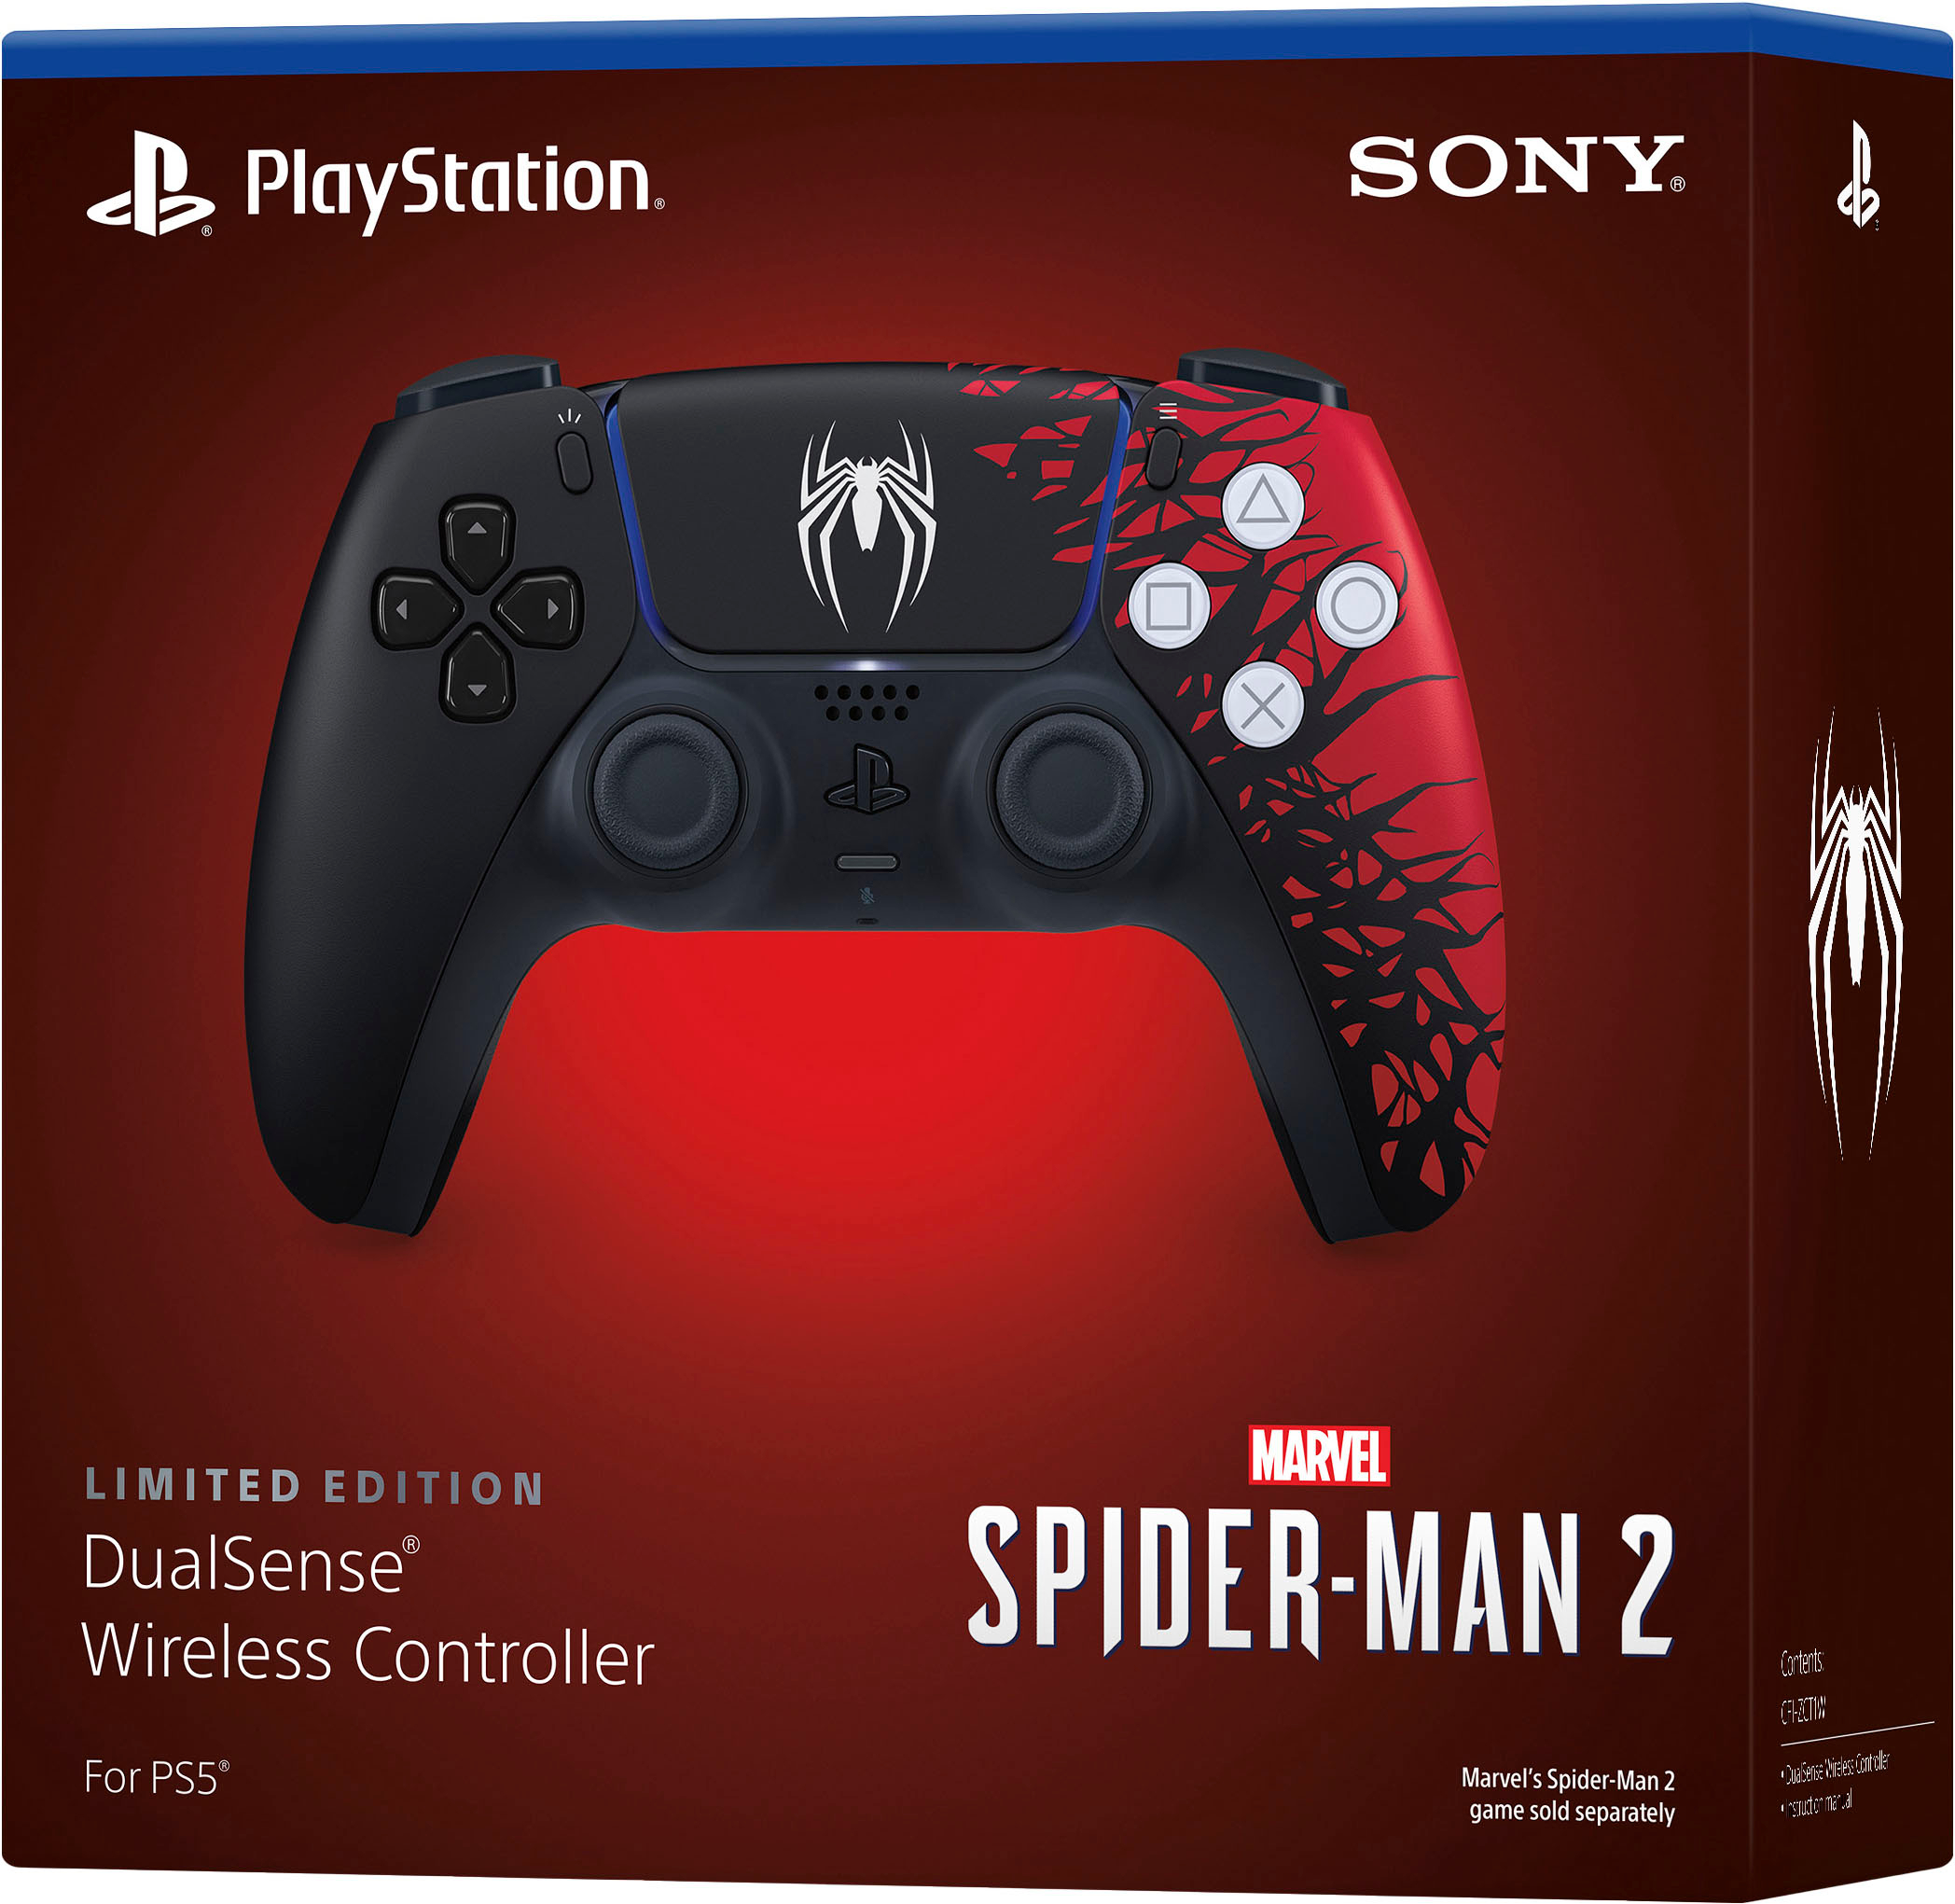 PS5 Controllers - Best Buy